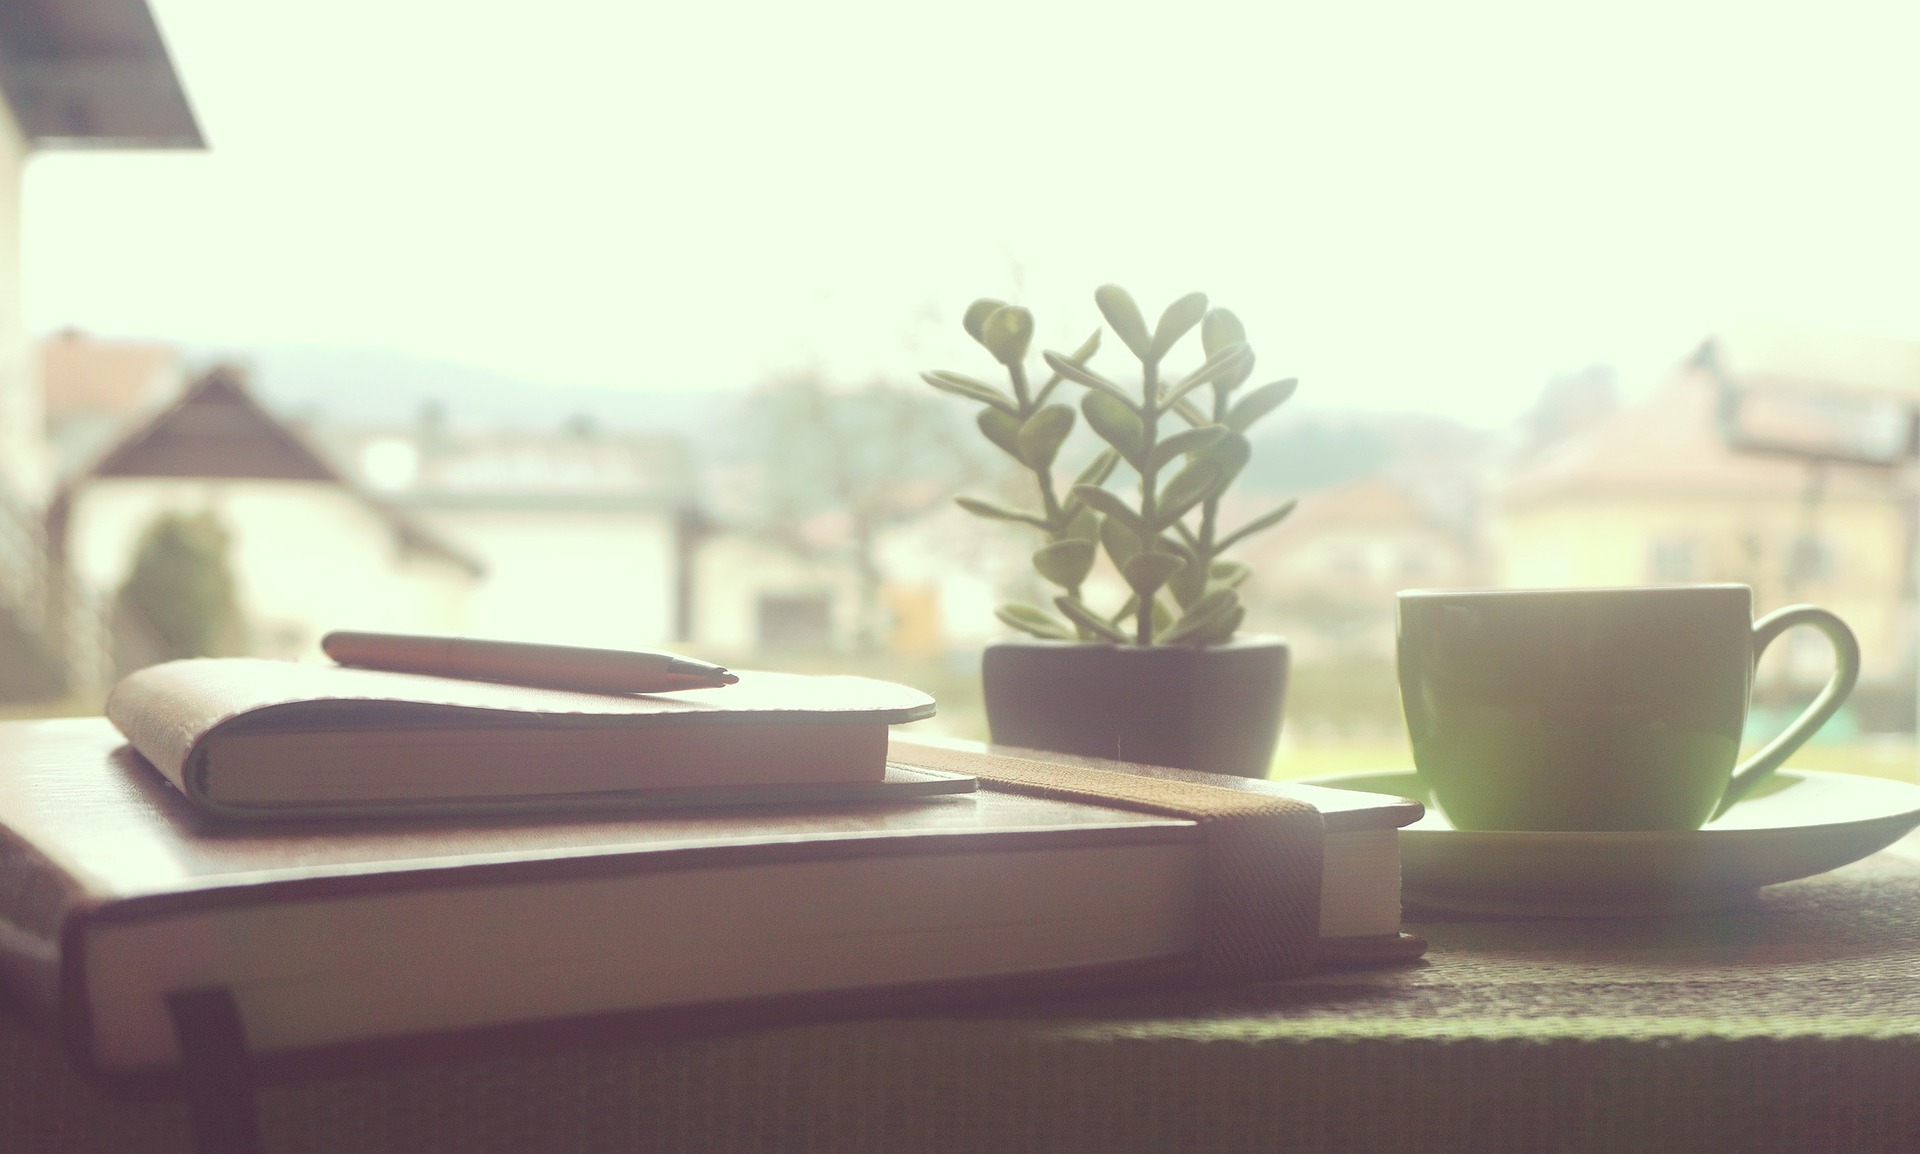 Plant, notebook, and coffee cup on a desk with a cityscape background